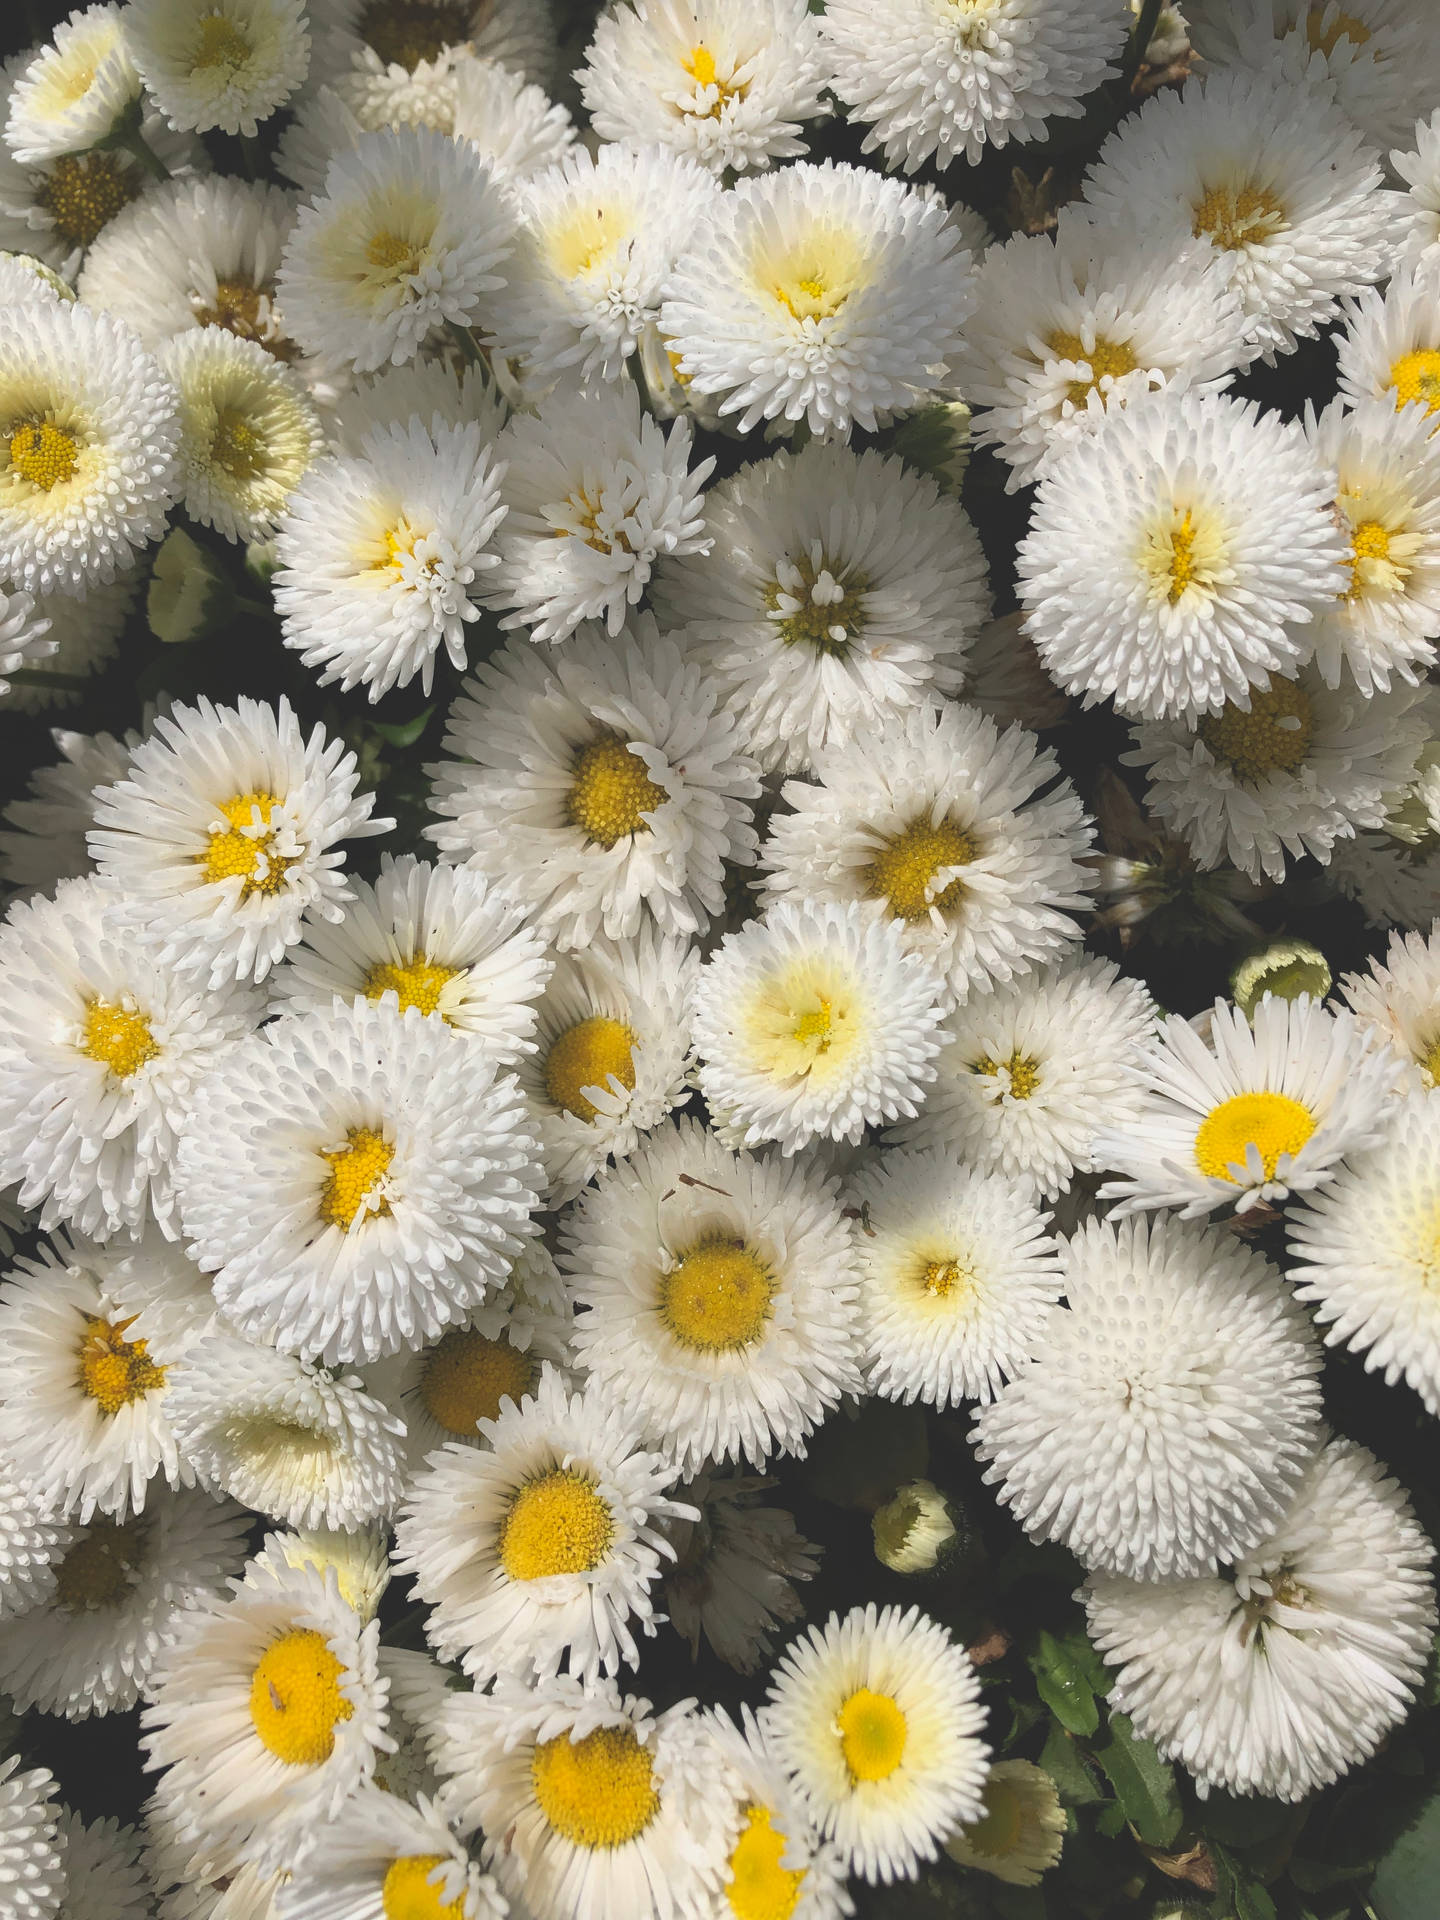 Aesthetic wallpaper of daisy flowers with white petals and yellow disc. 